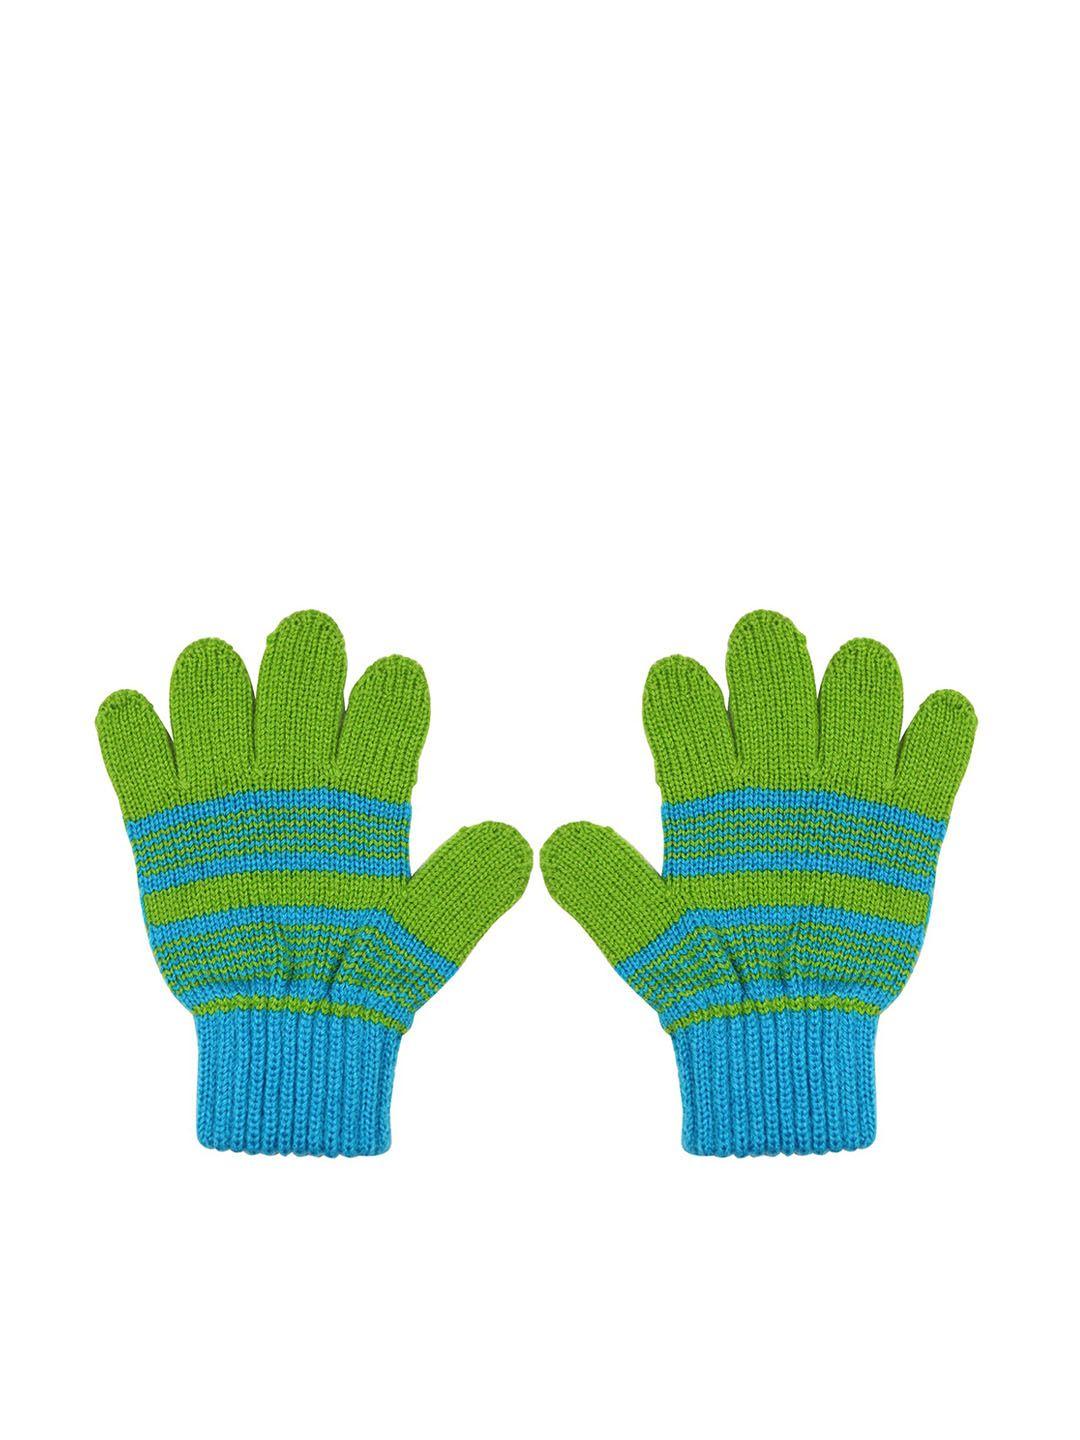 baesd kids striped knitted winter gloves